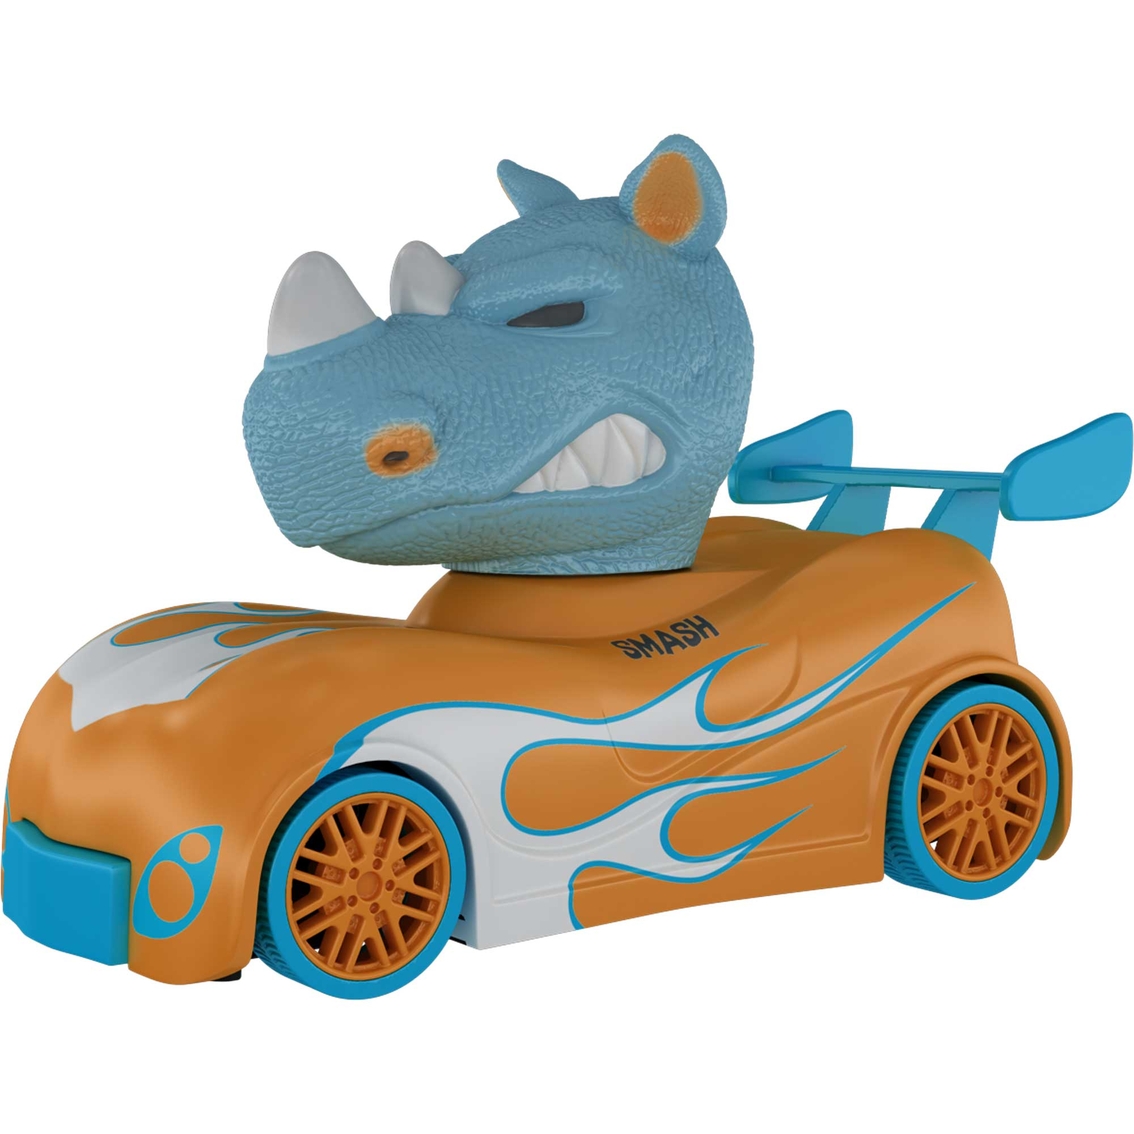 Knuckle-Headz Remote Controlled Rhino Toy - Image 2 of 2